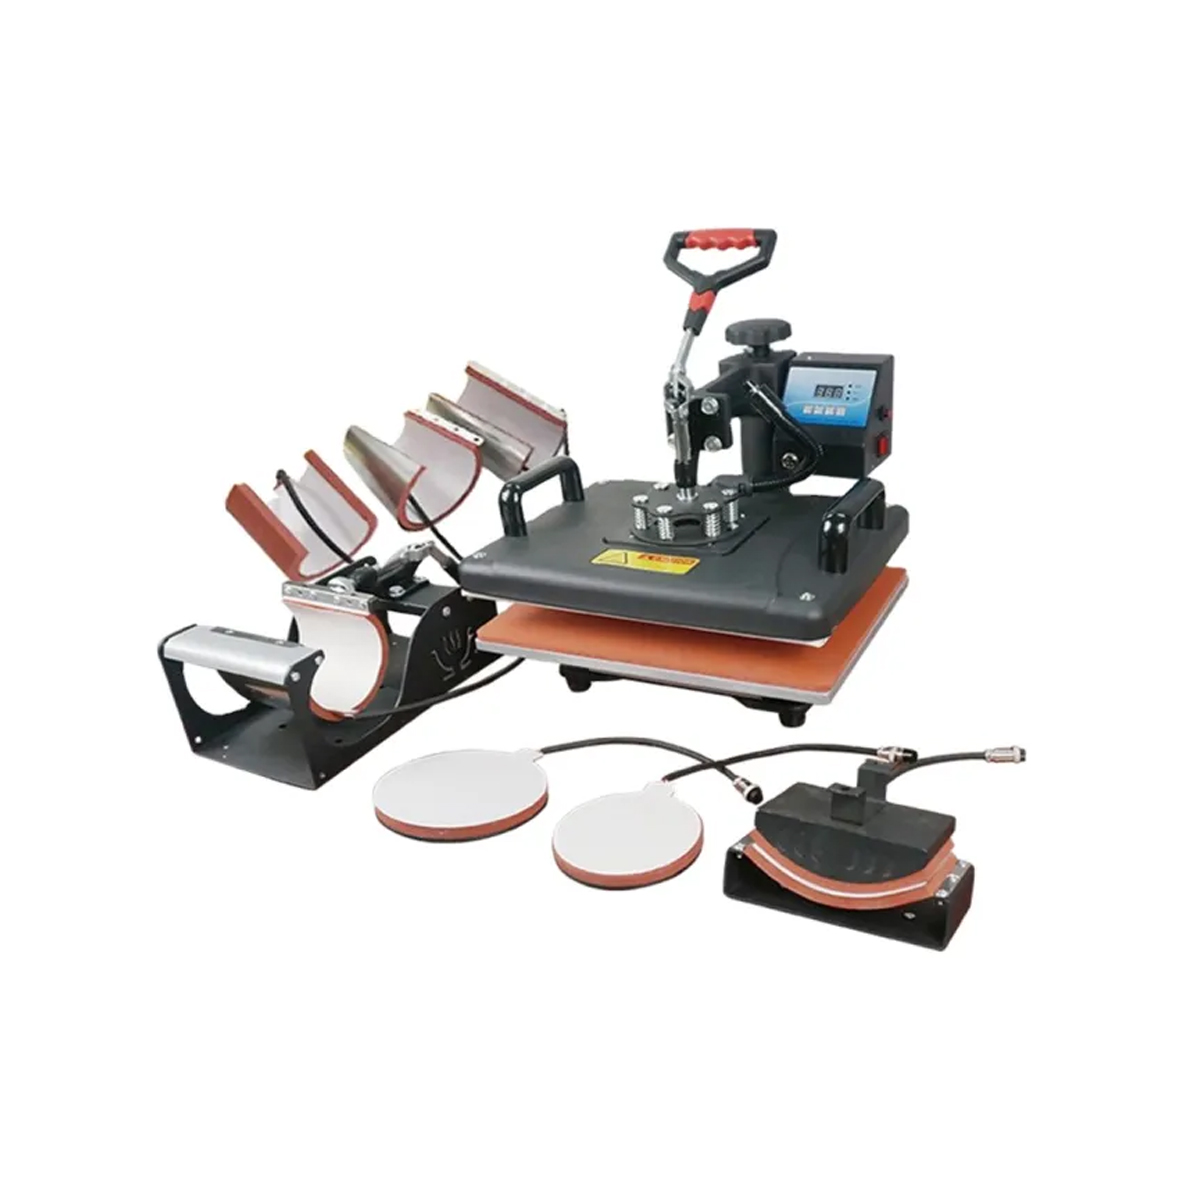 5 in 1 Double Display Sublimation Heat Press Machine price in Nepal